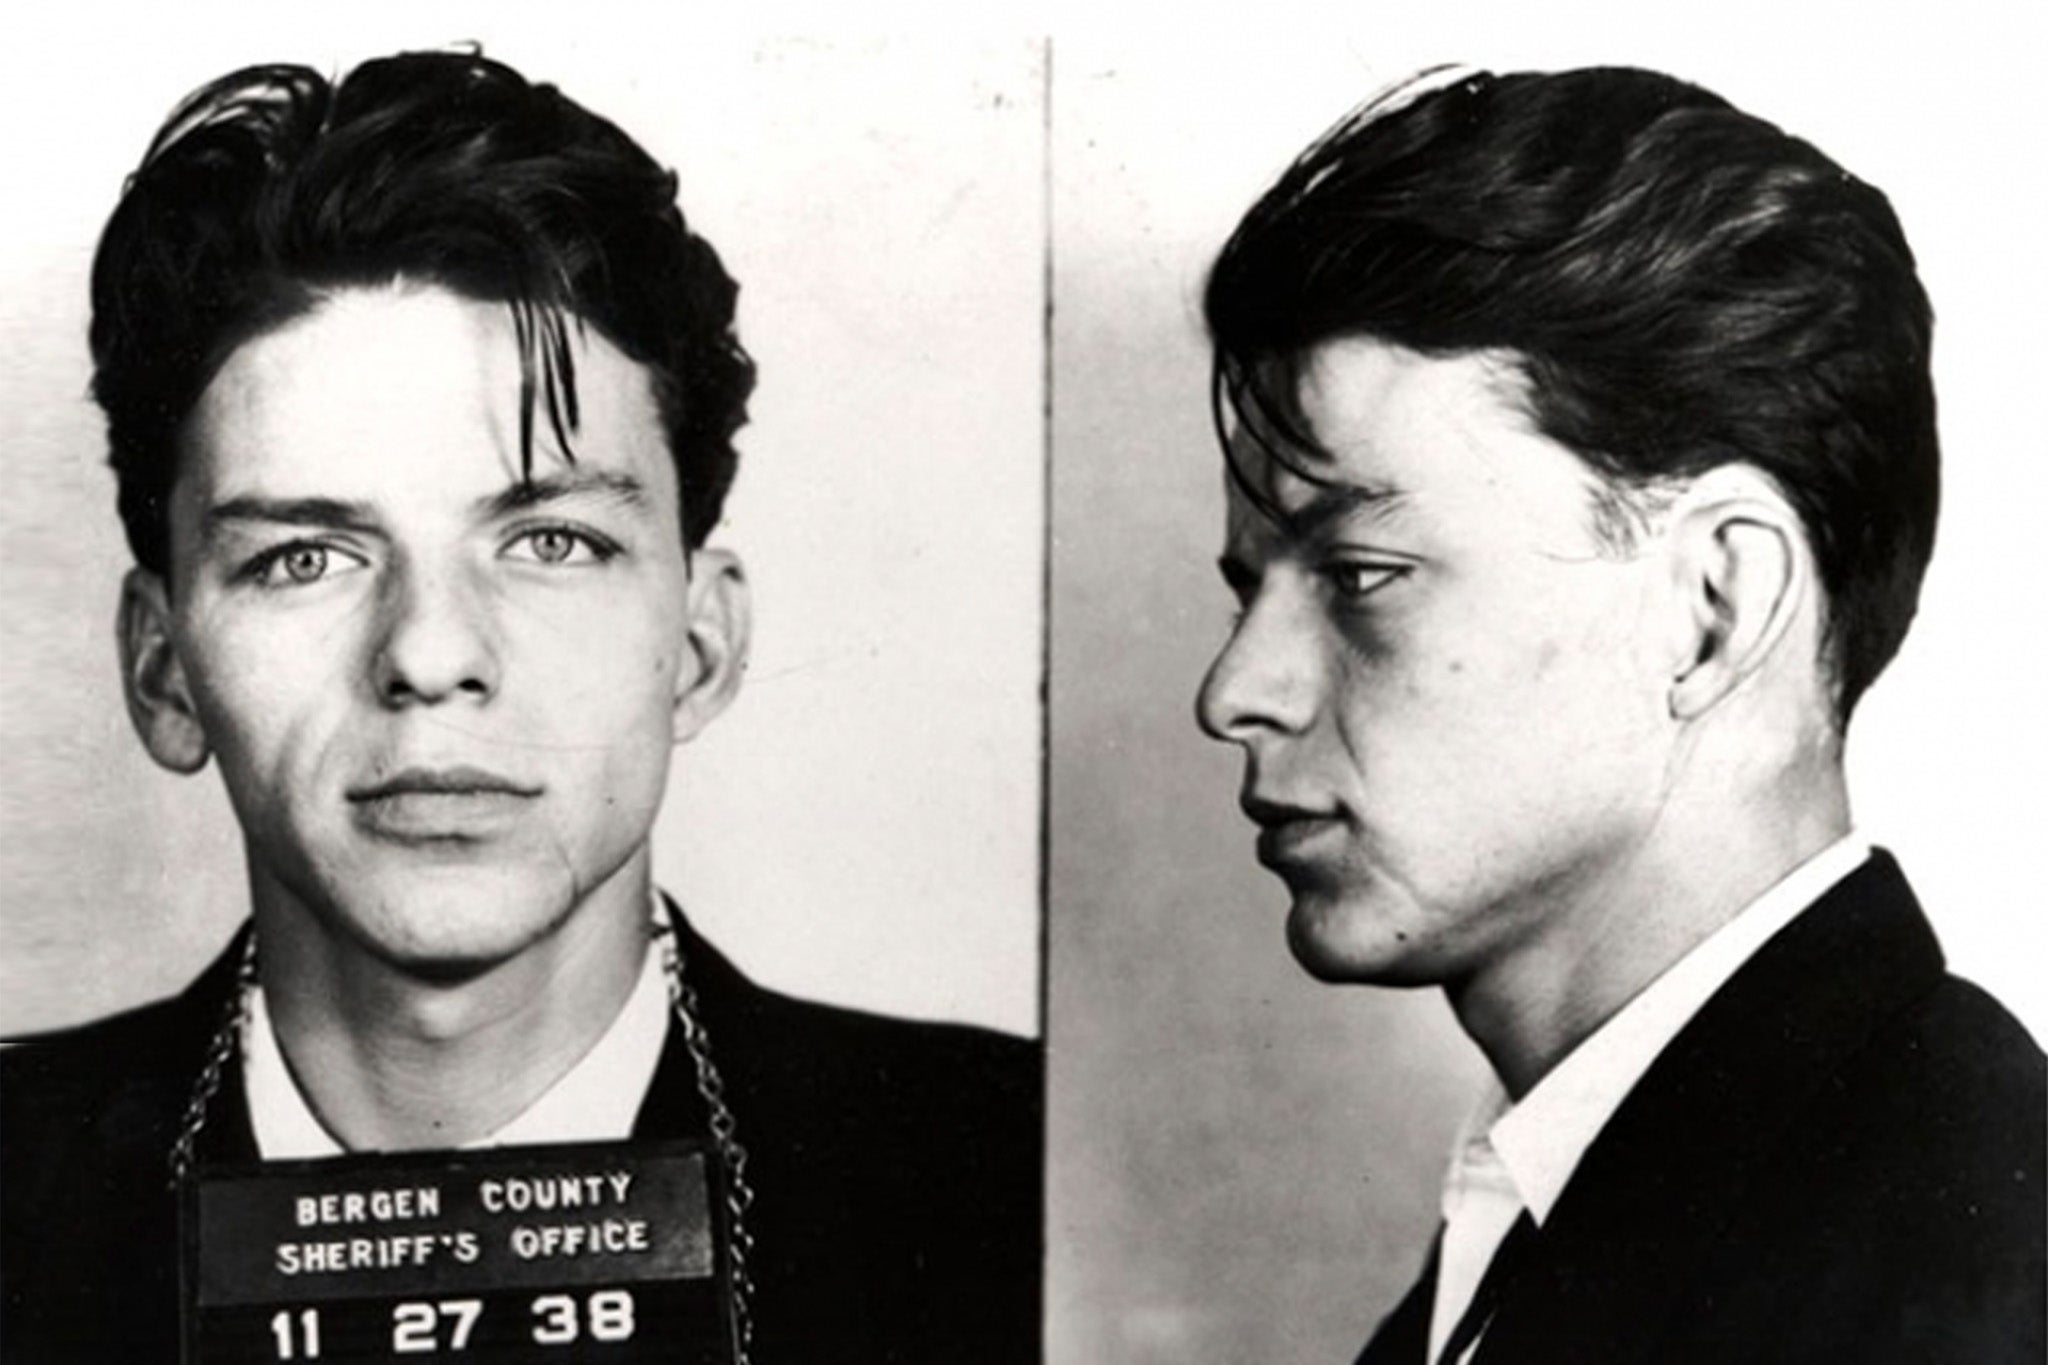 Singer Frank Sinatra was 23 years old when he was arrested and booked for adultery in New Jersey in 1938